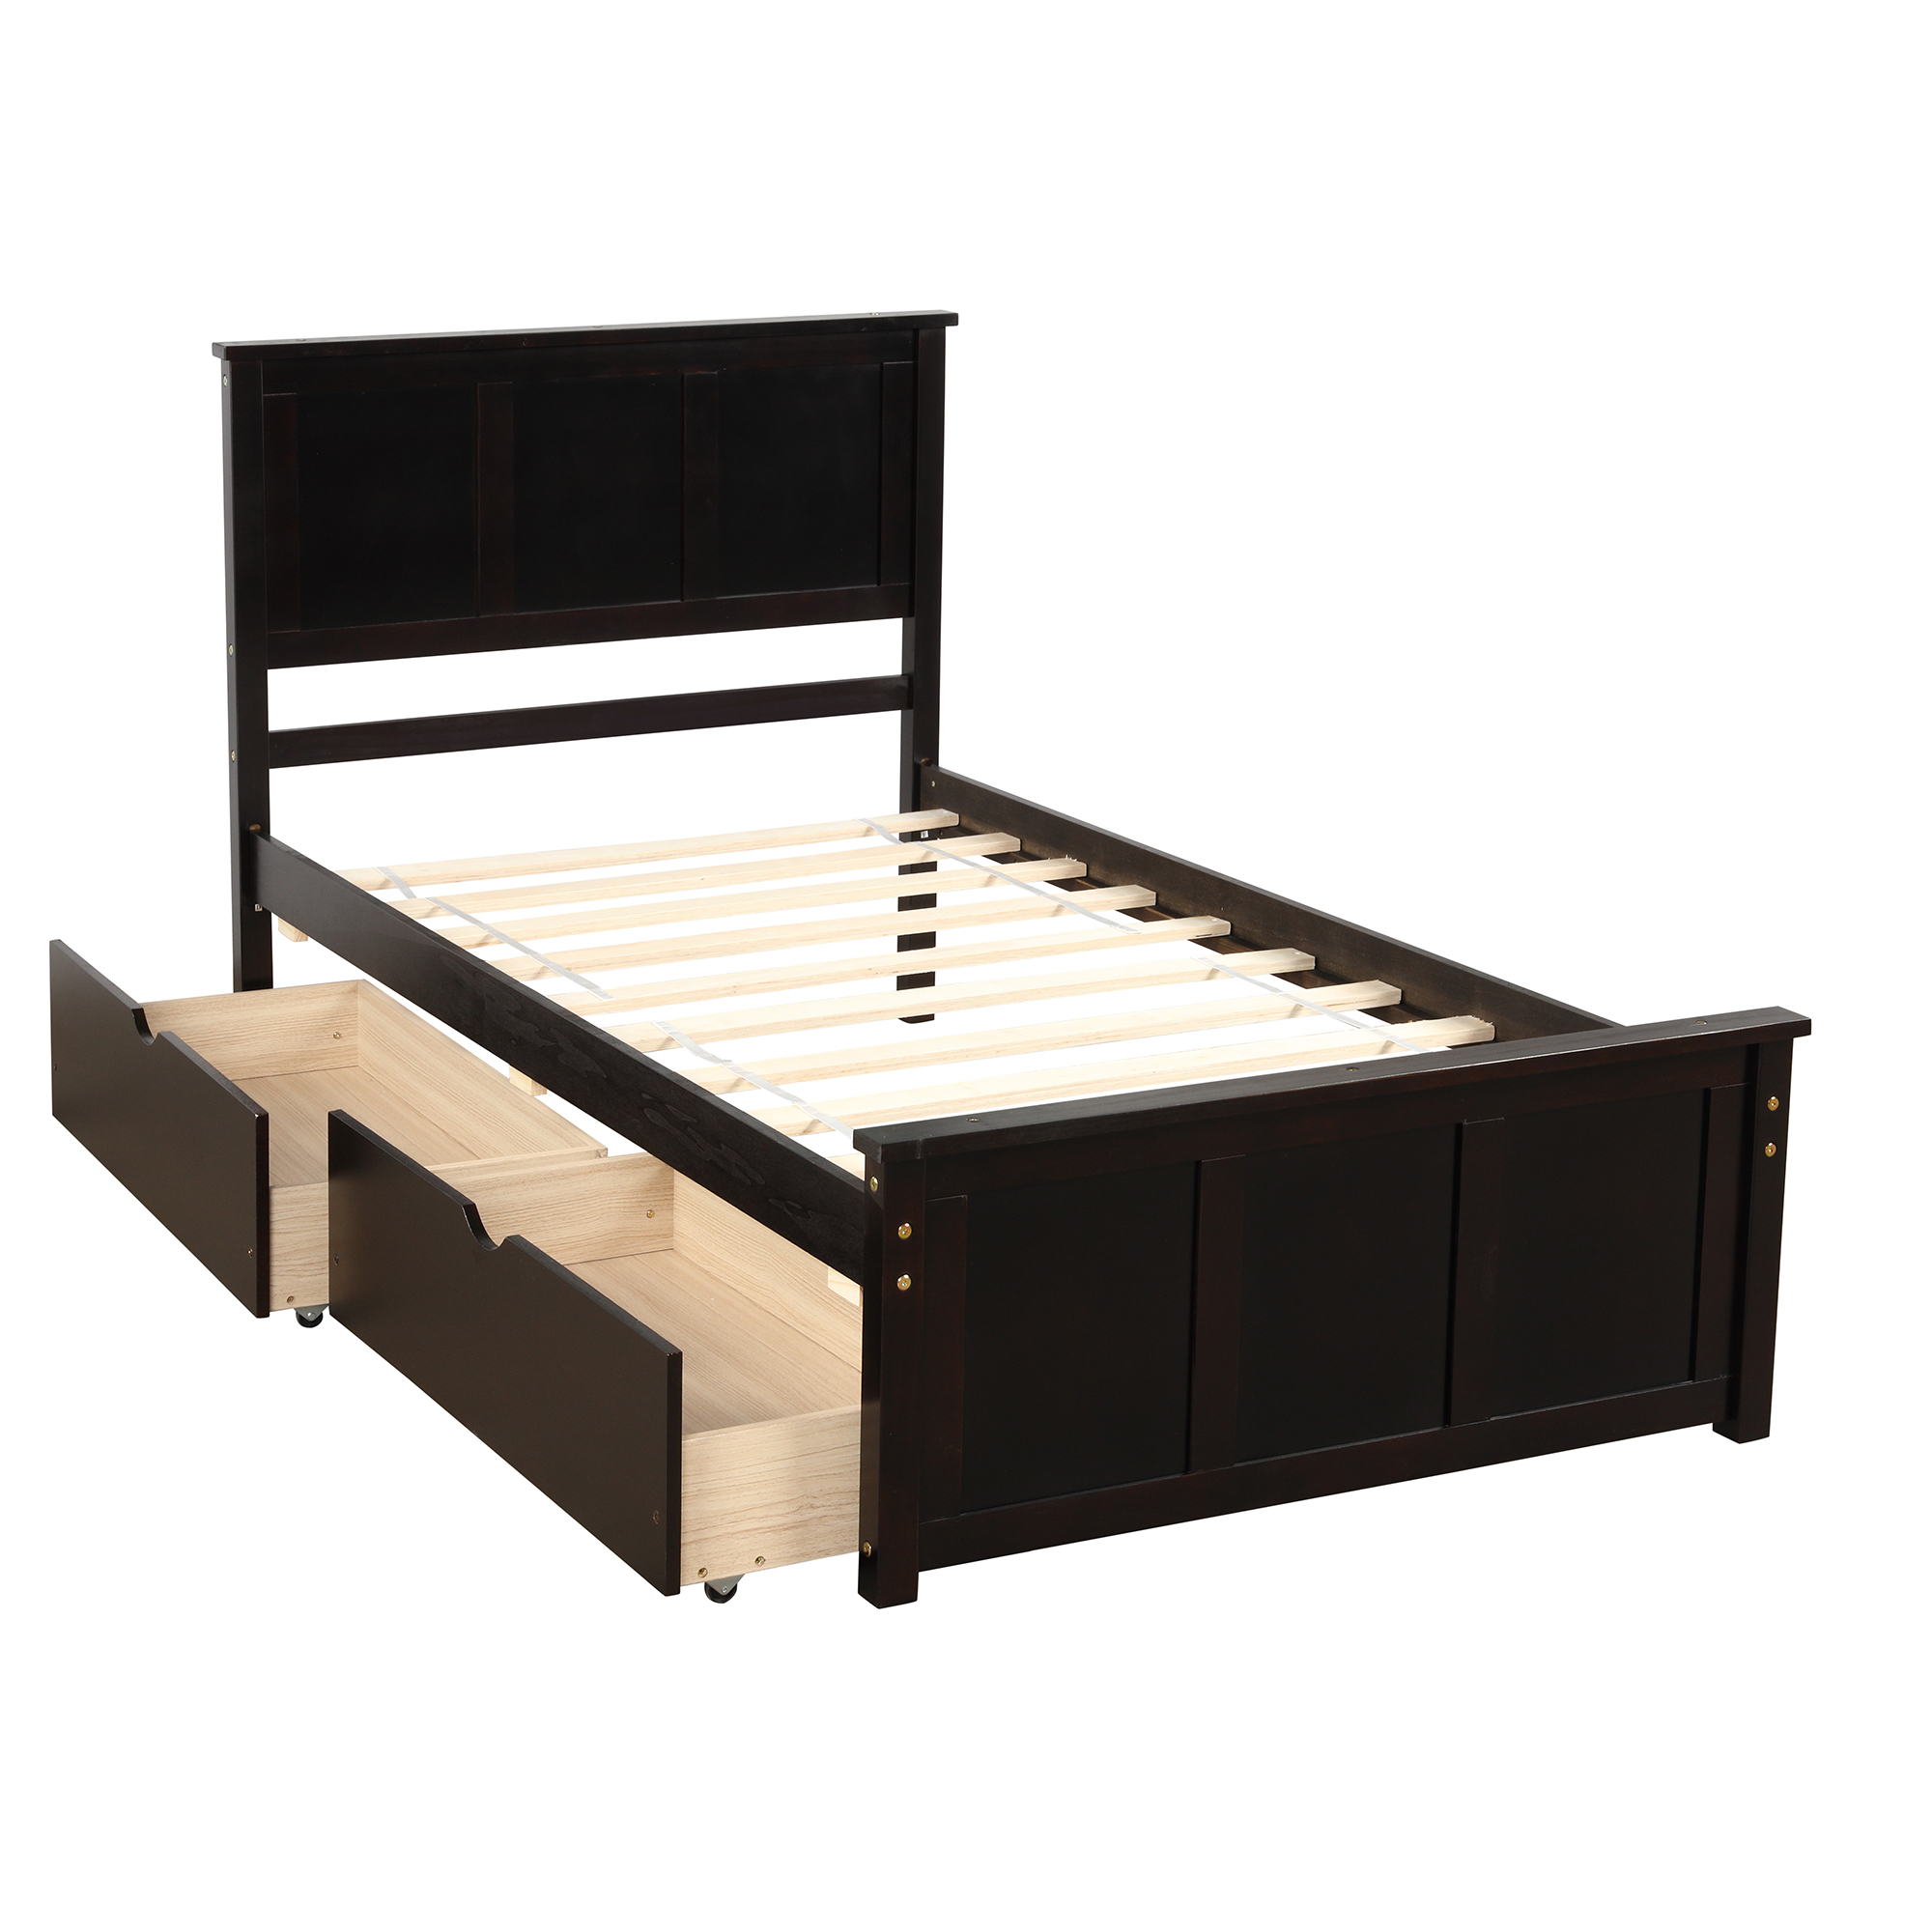 Euroco Wood Twin Platform Bed with Headboard & 2 Storage Drawers for Kids, Espresso - image 5 of 10